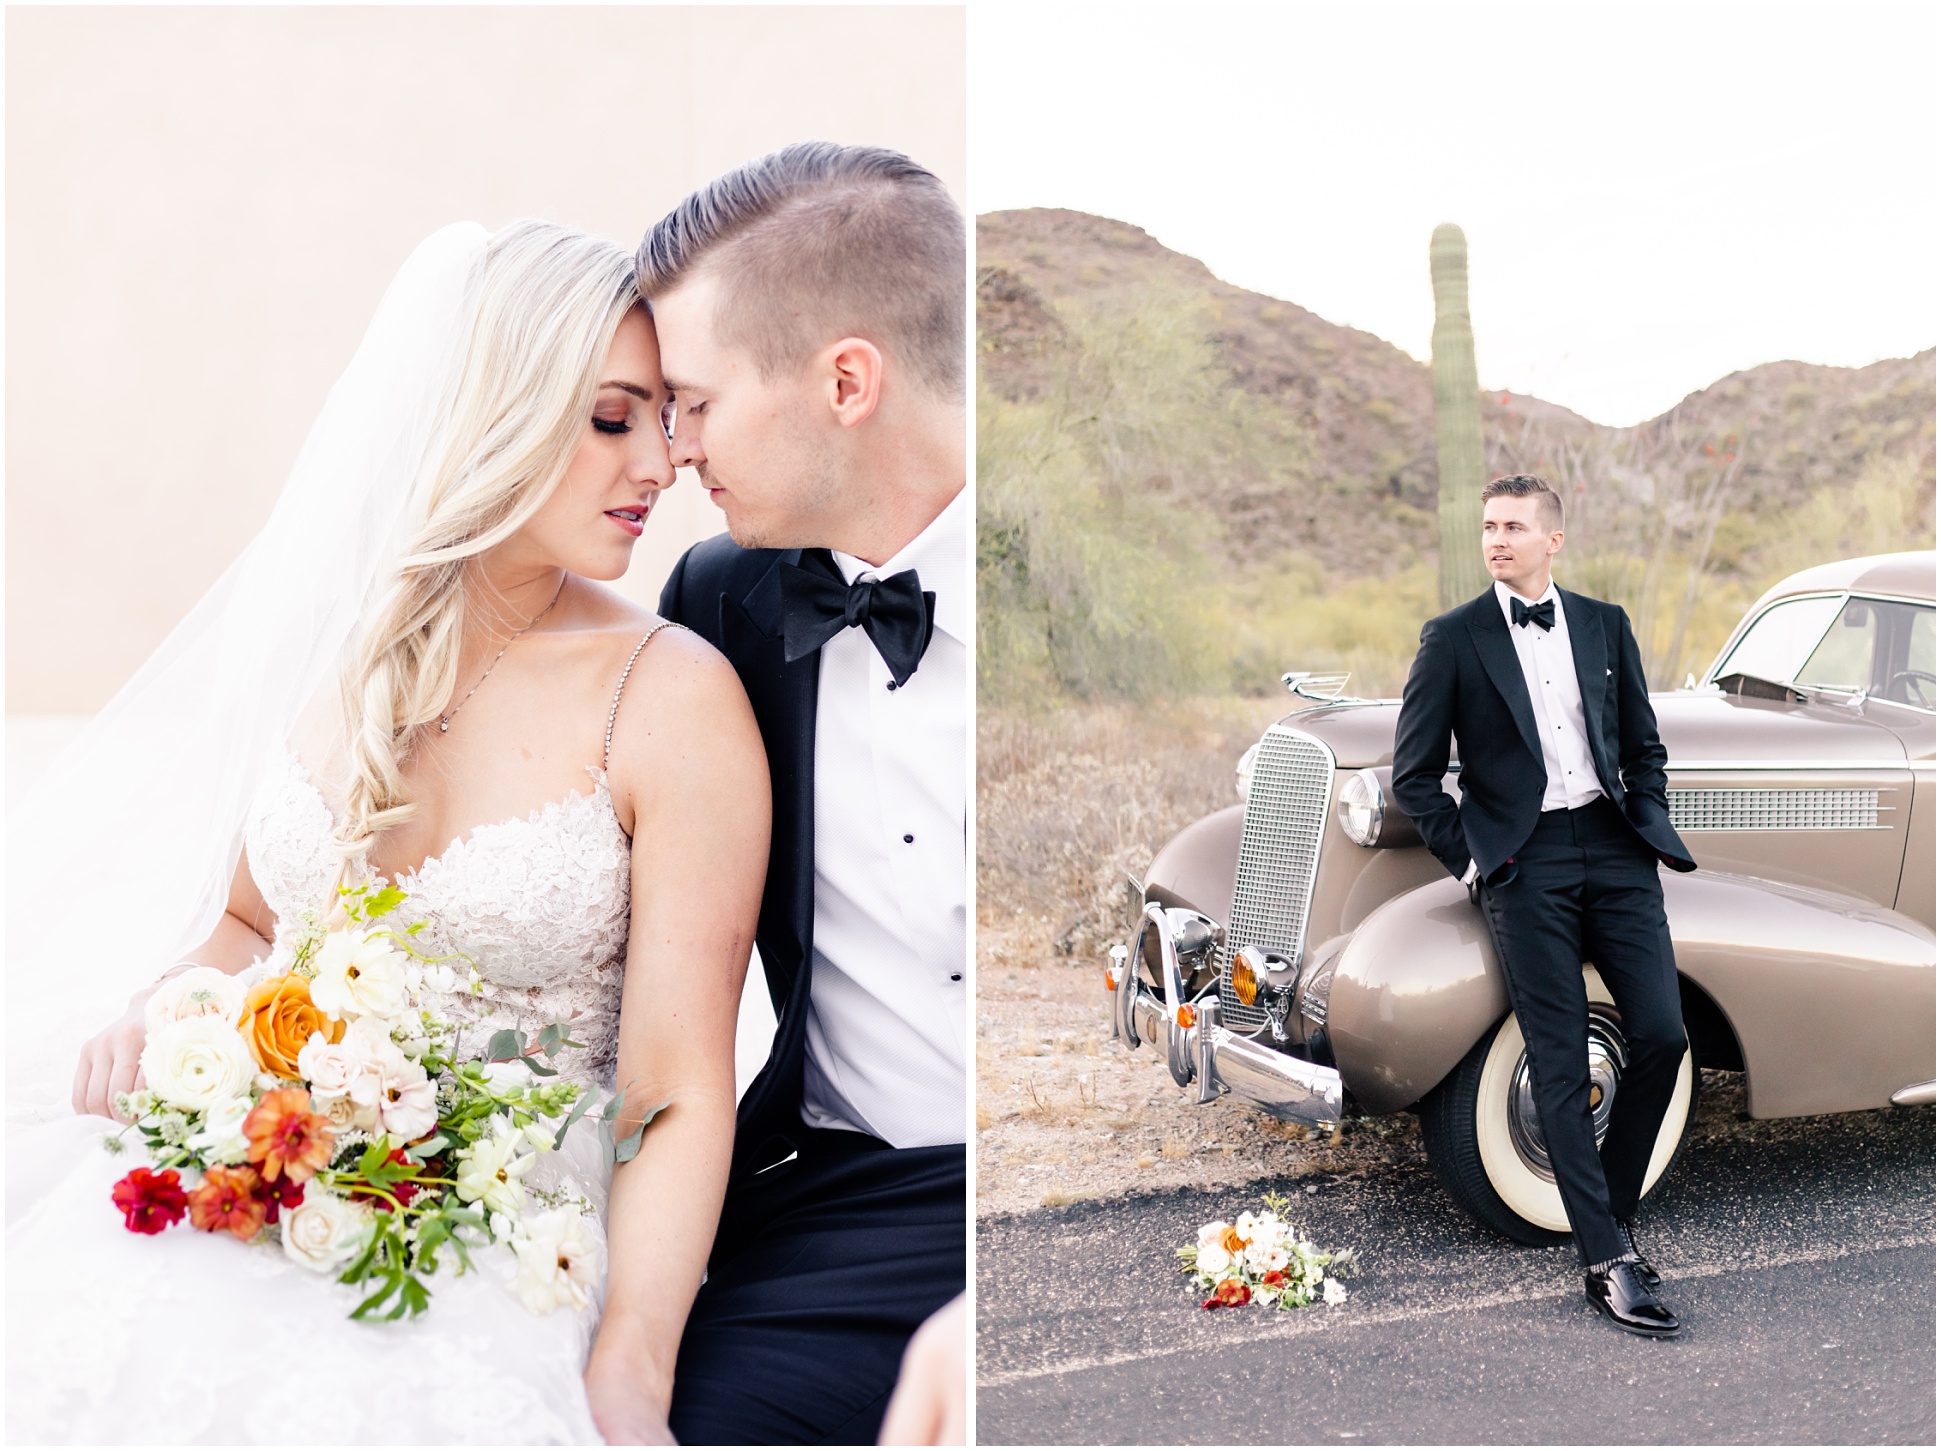 Left Photo Danny and Brooklyn touching foreheads while Brooklyn hold Wild Flower AZ flowers at North Mountain Park; Right Photo Danny leaning against front of 1937 Cadillac in black tux